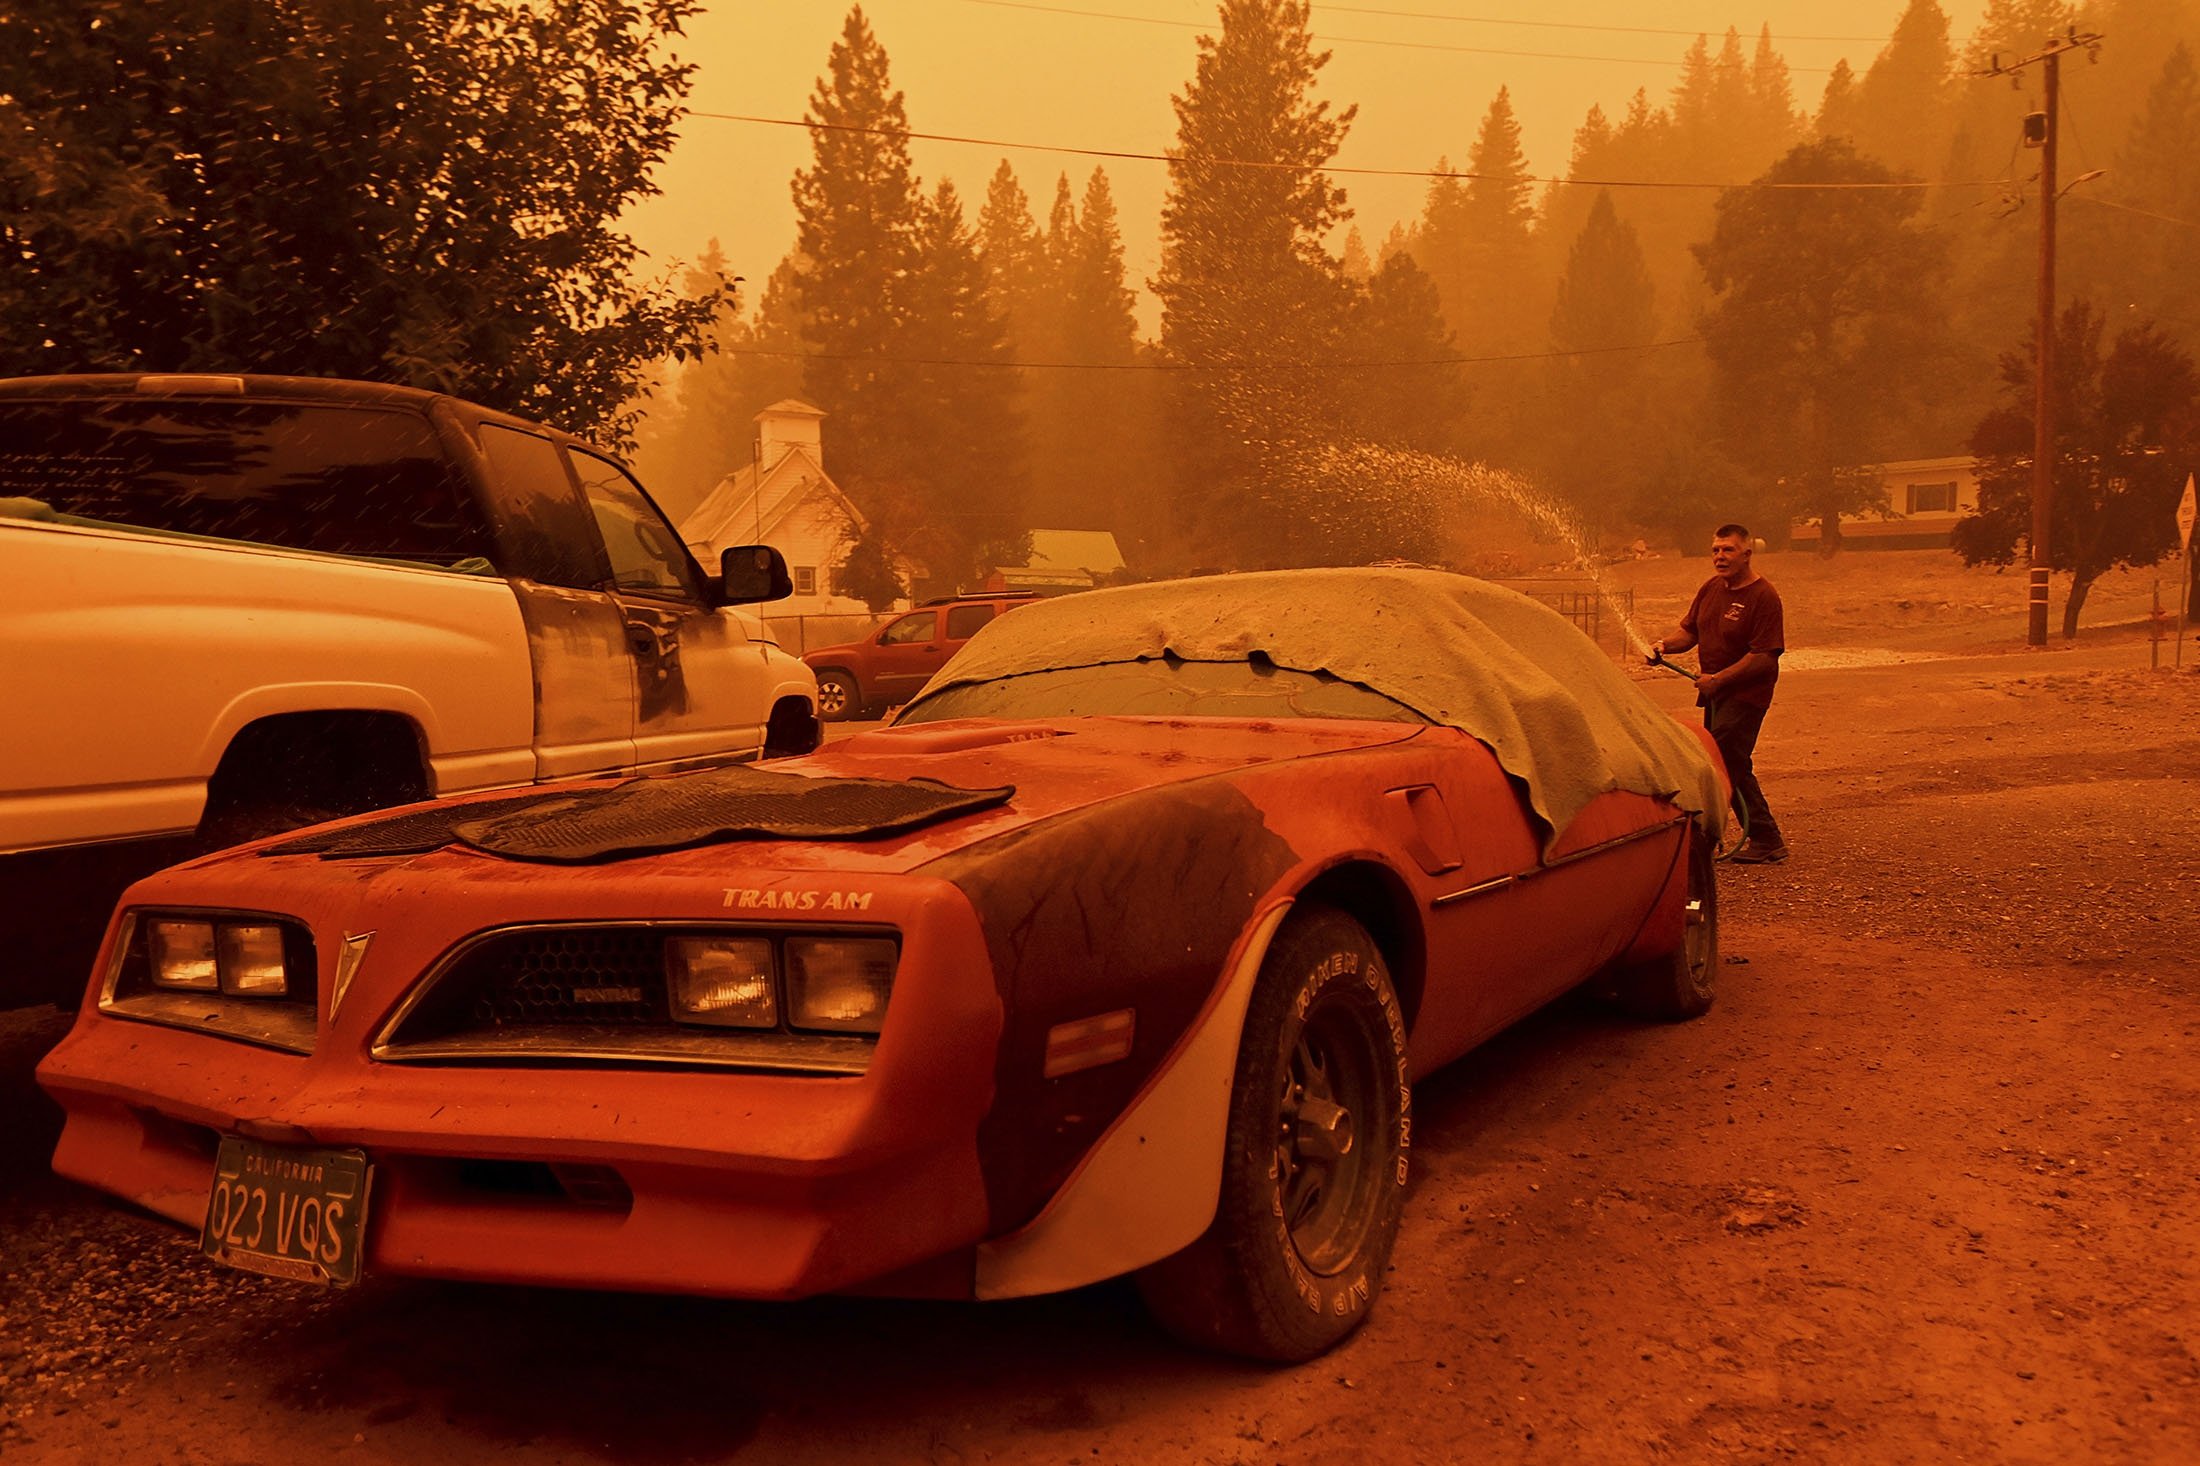 William Deal wets down his 1977 Trans Am as the Dixie Fire approaches Crescent Mills in Plumas County, California, U.S., July 24, 2021. (AP Photo)